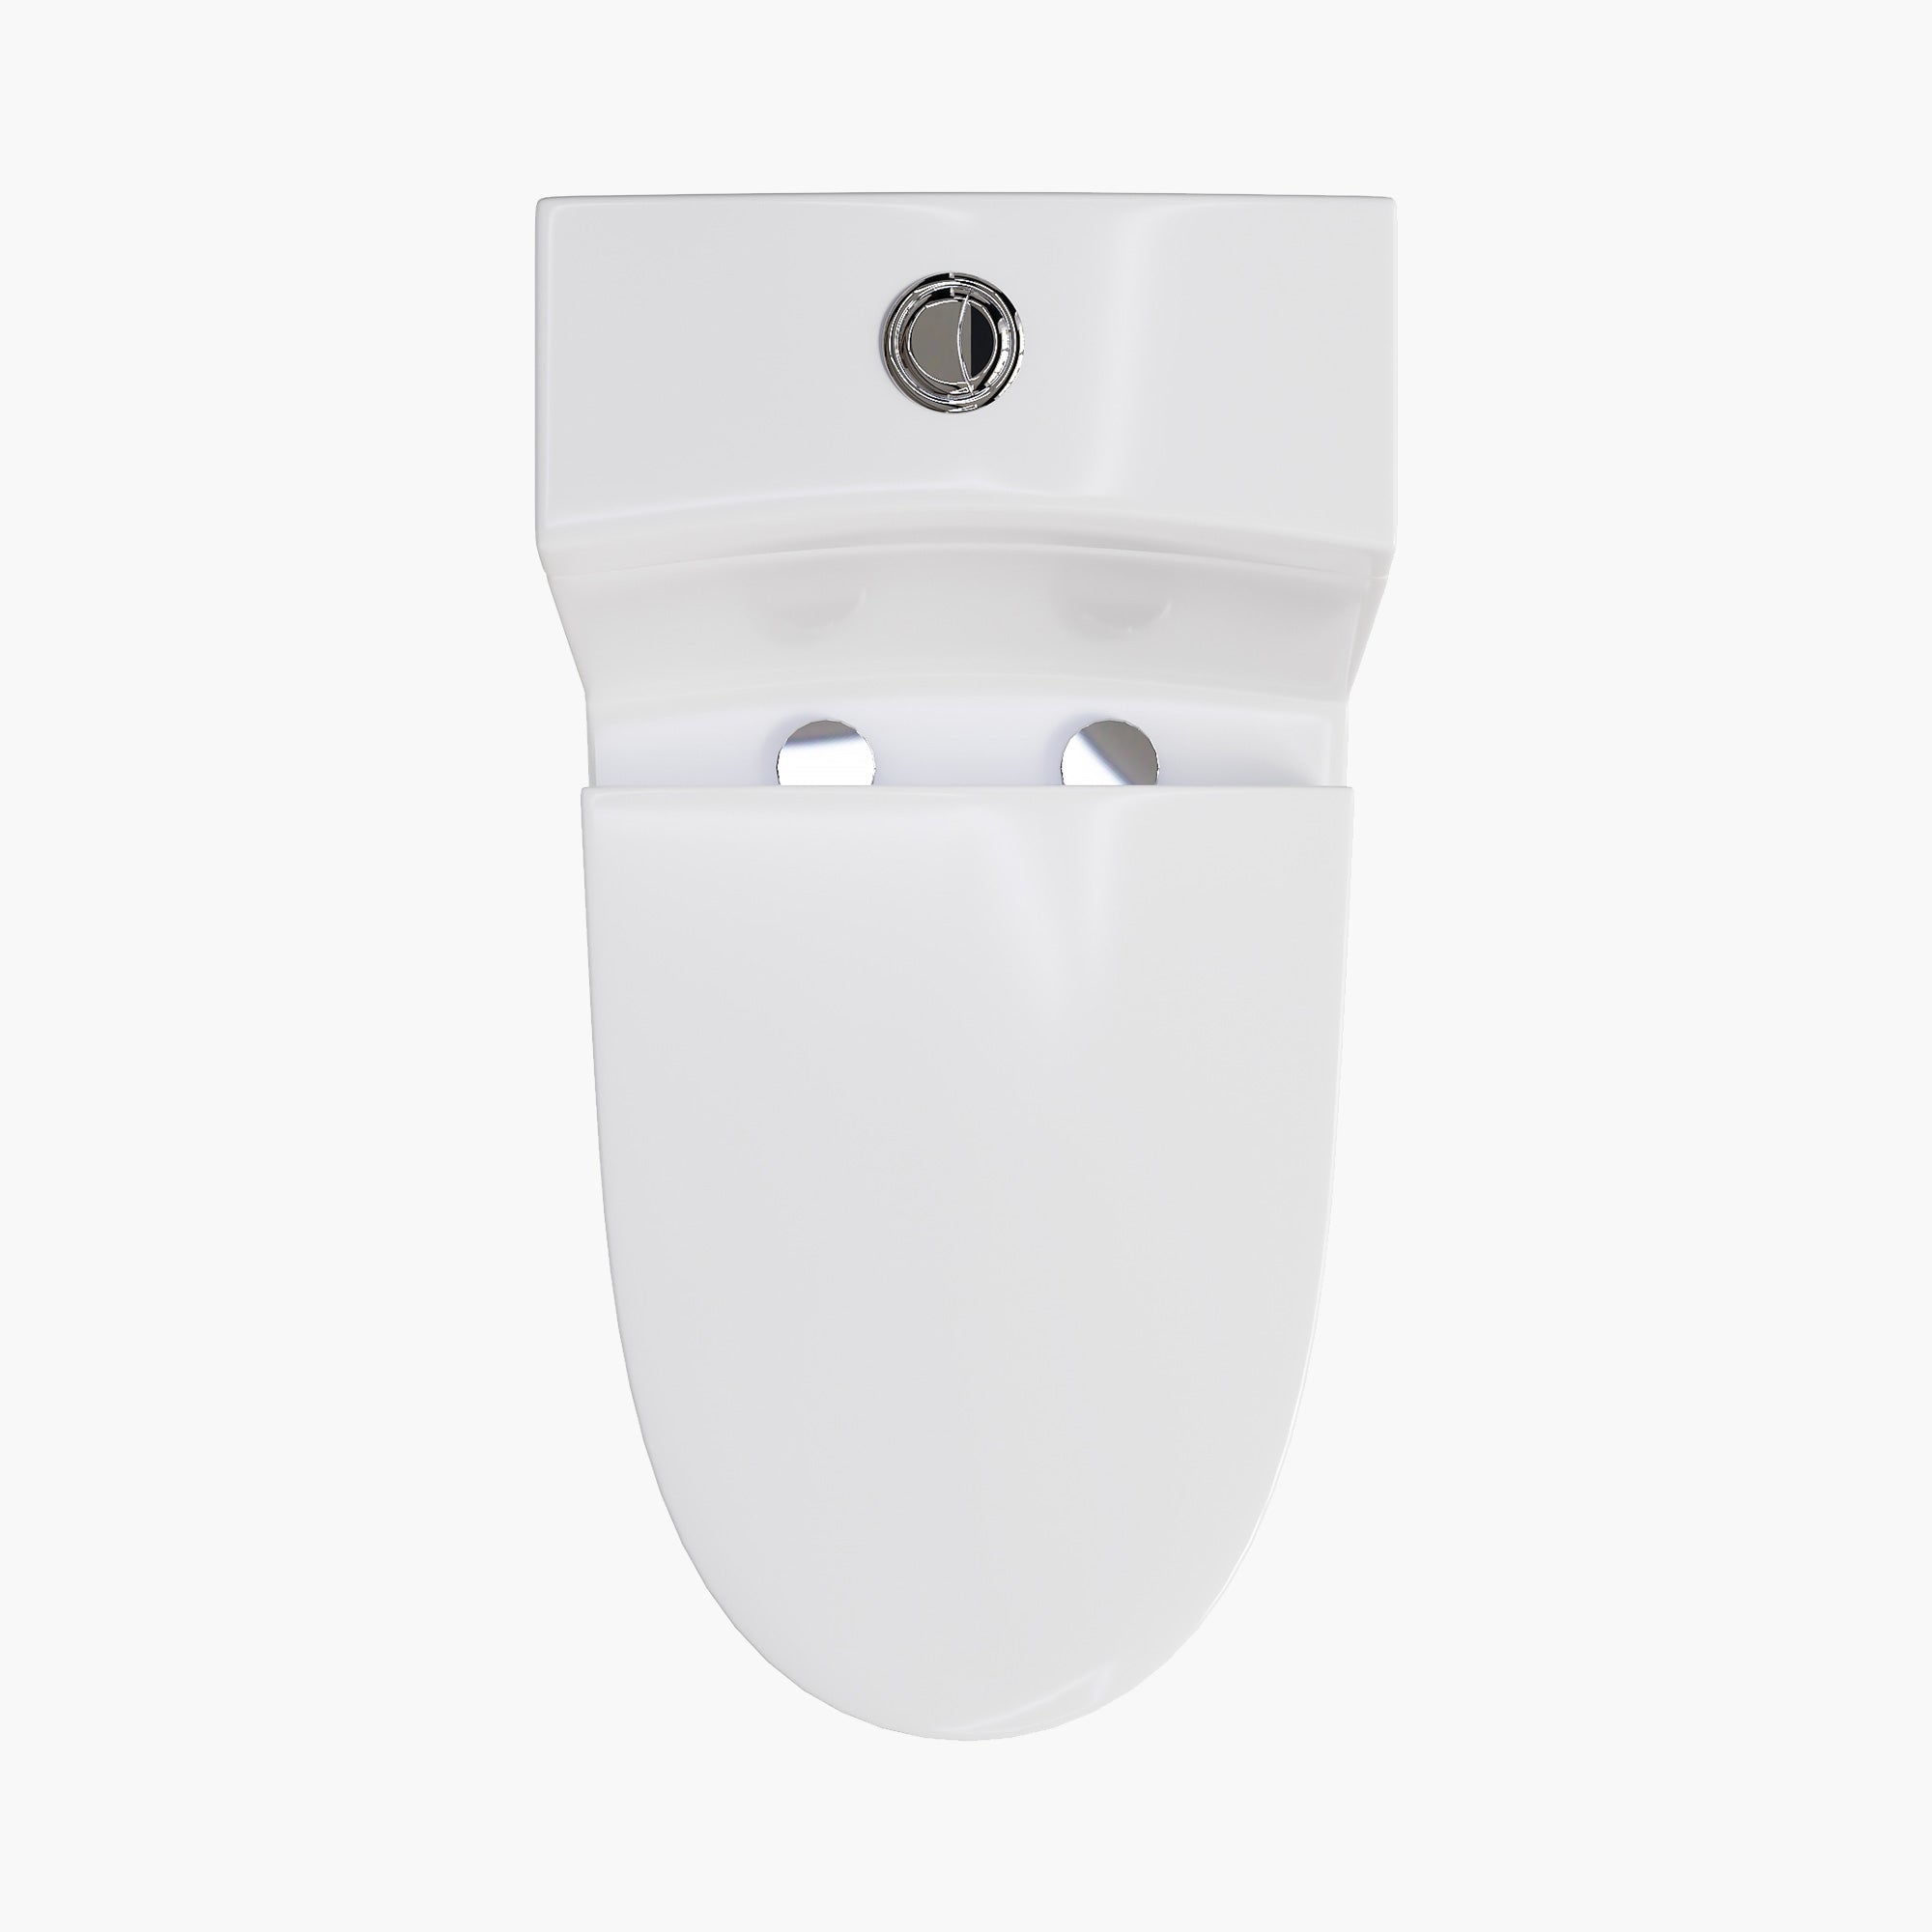 HOROW Compact Elongated Toilet One Piece Dual Flush 1.1 OR 1.6 GPF Toilet Model T0280W